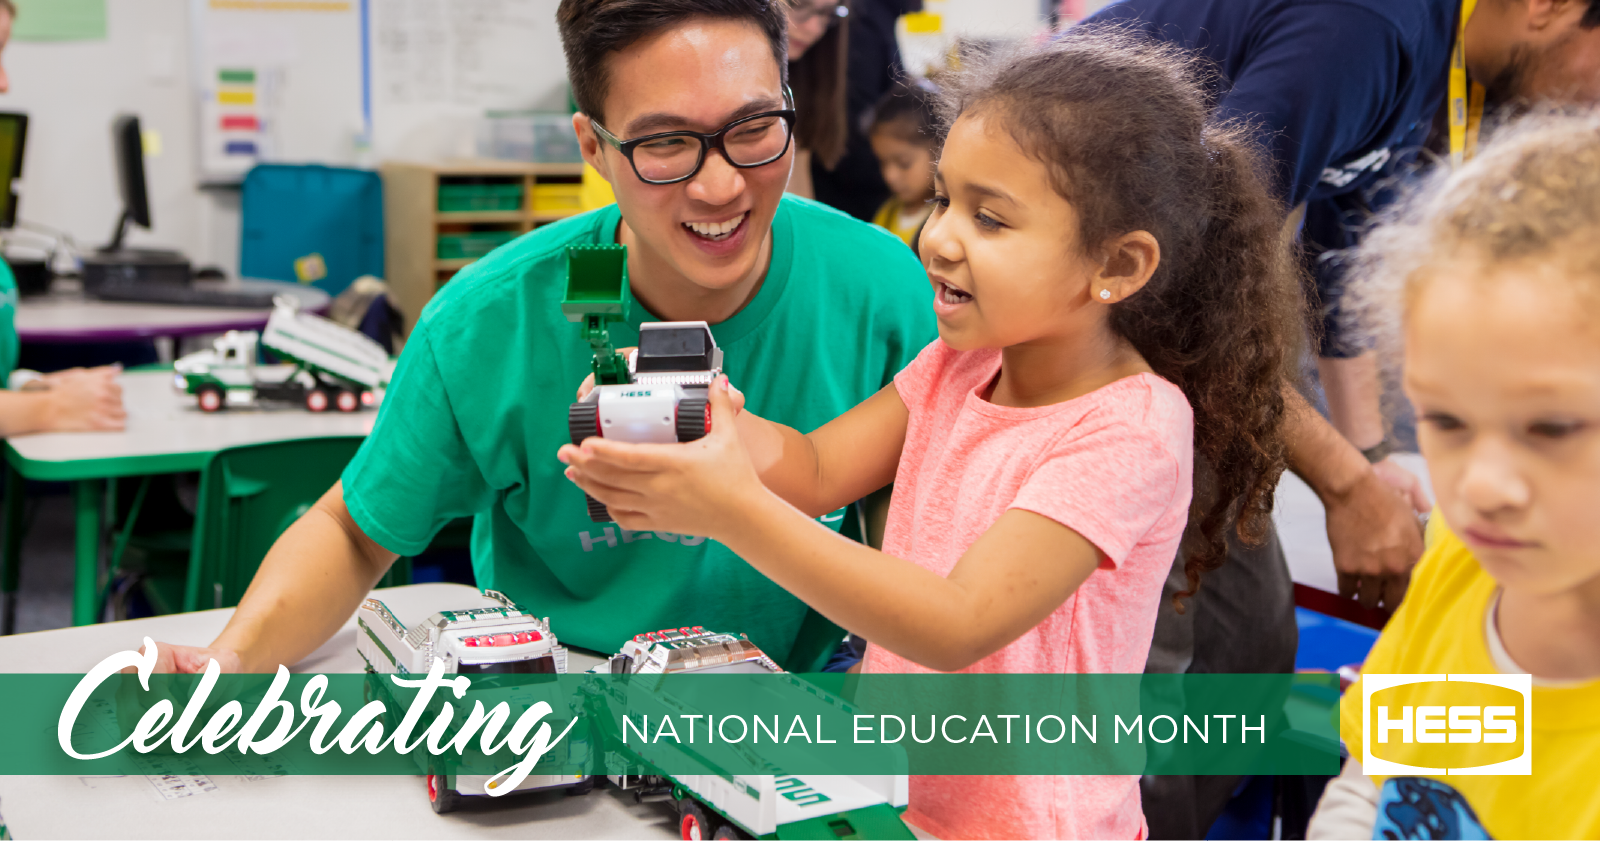 Hess Recognizes Teachers and Educators for National Education Month